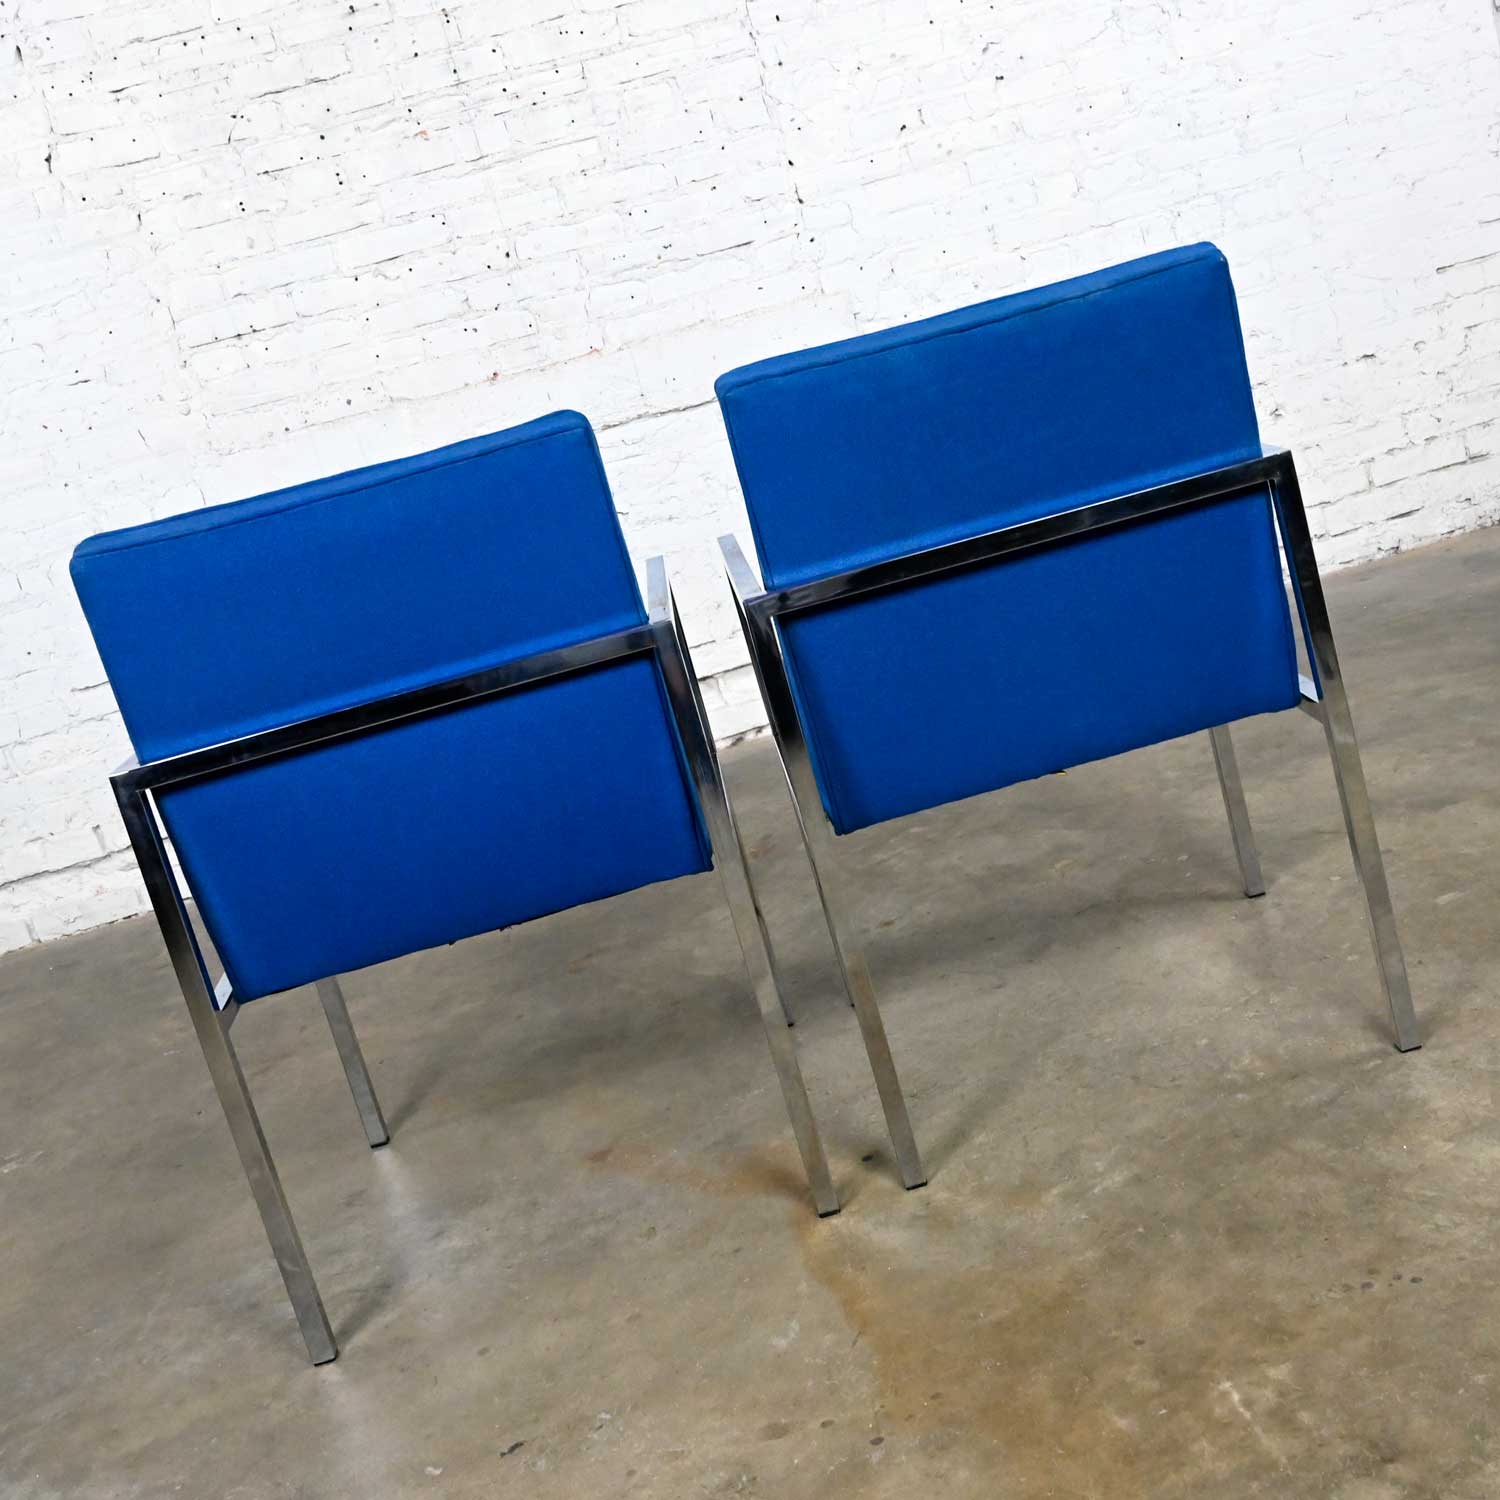 Vintage Mid-Century Modern Chrome & Royal Blue Fabric Armchairs by Hibriten Chair Company